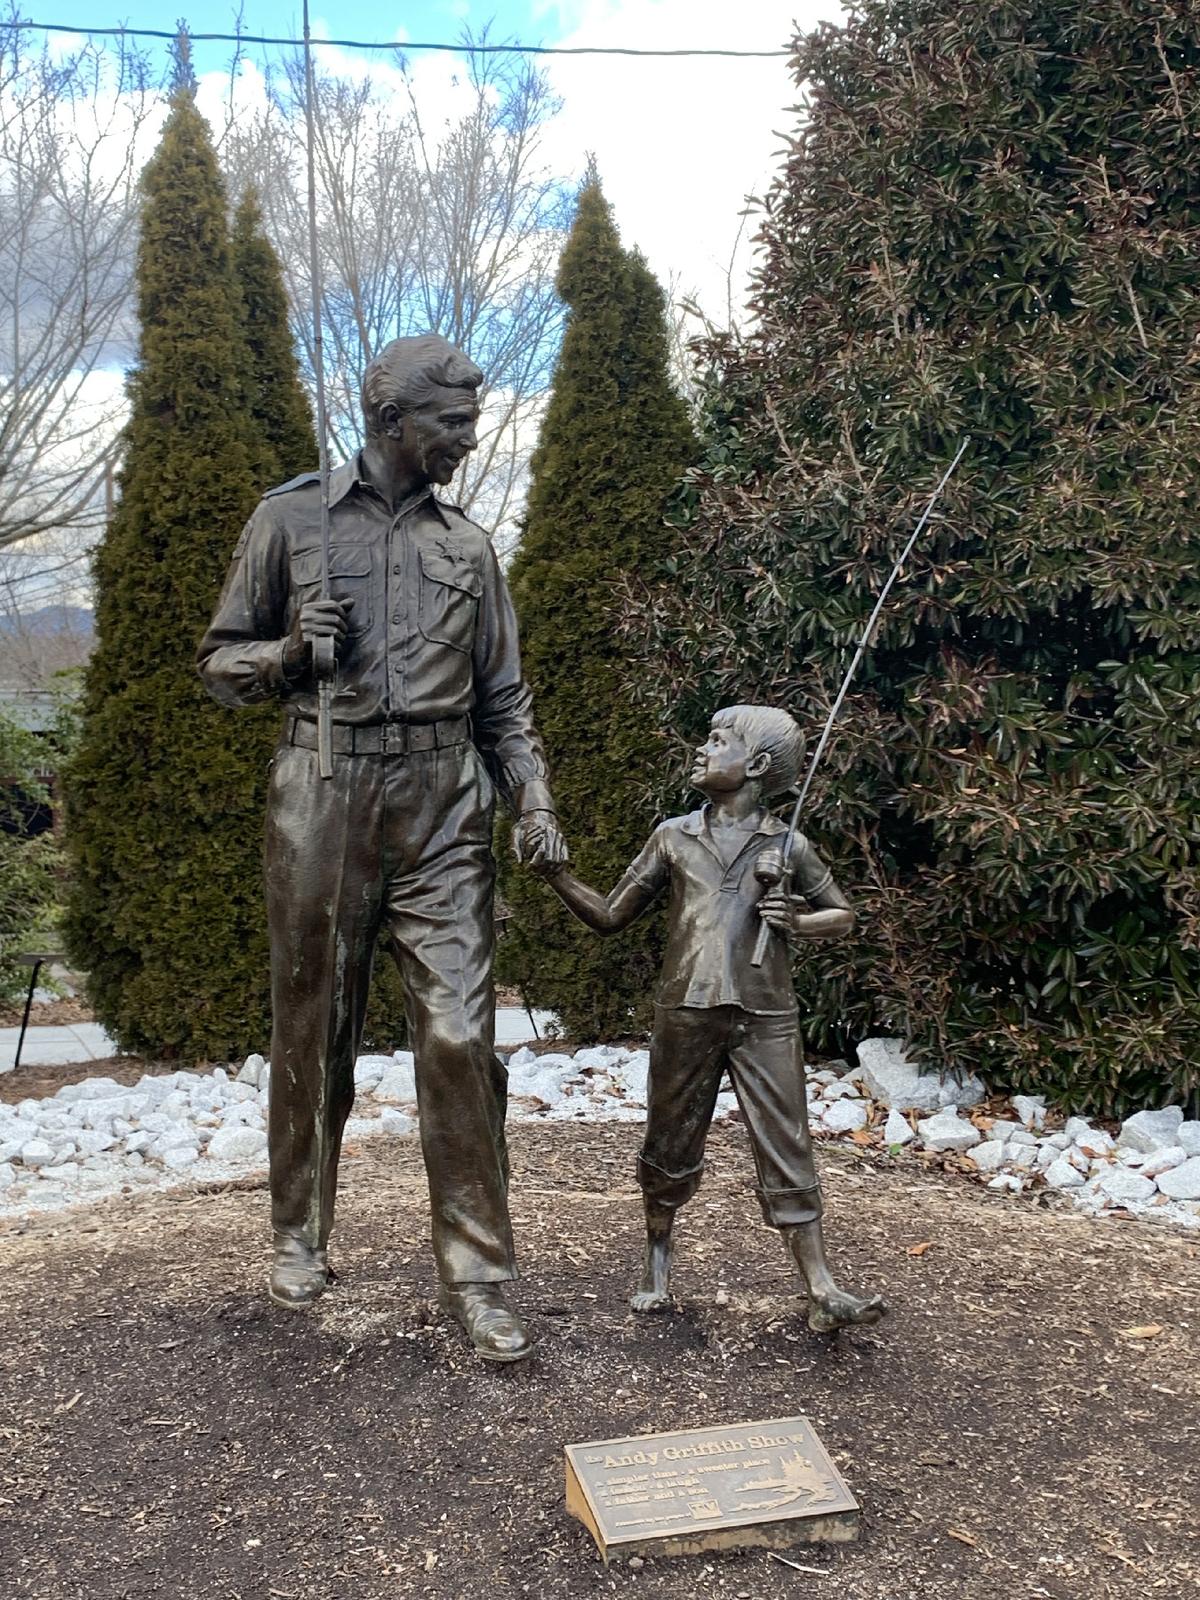 Statues of Andy Griffith (Sheriff Andy Taylor) and Ron Howard (Opie), stars of “The Andy Griffith Show,” are a photo op for tourists in front of the Andy Griffith Museum and Playhouse in Mount Airy, N.C. (Courtesy of Sharon Whitley Larsen)